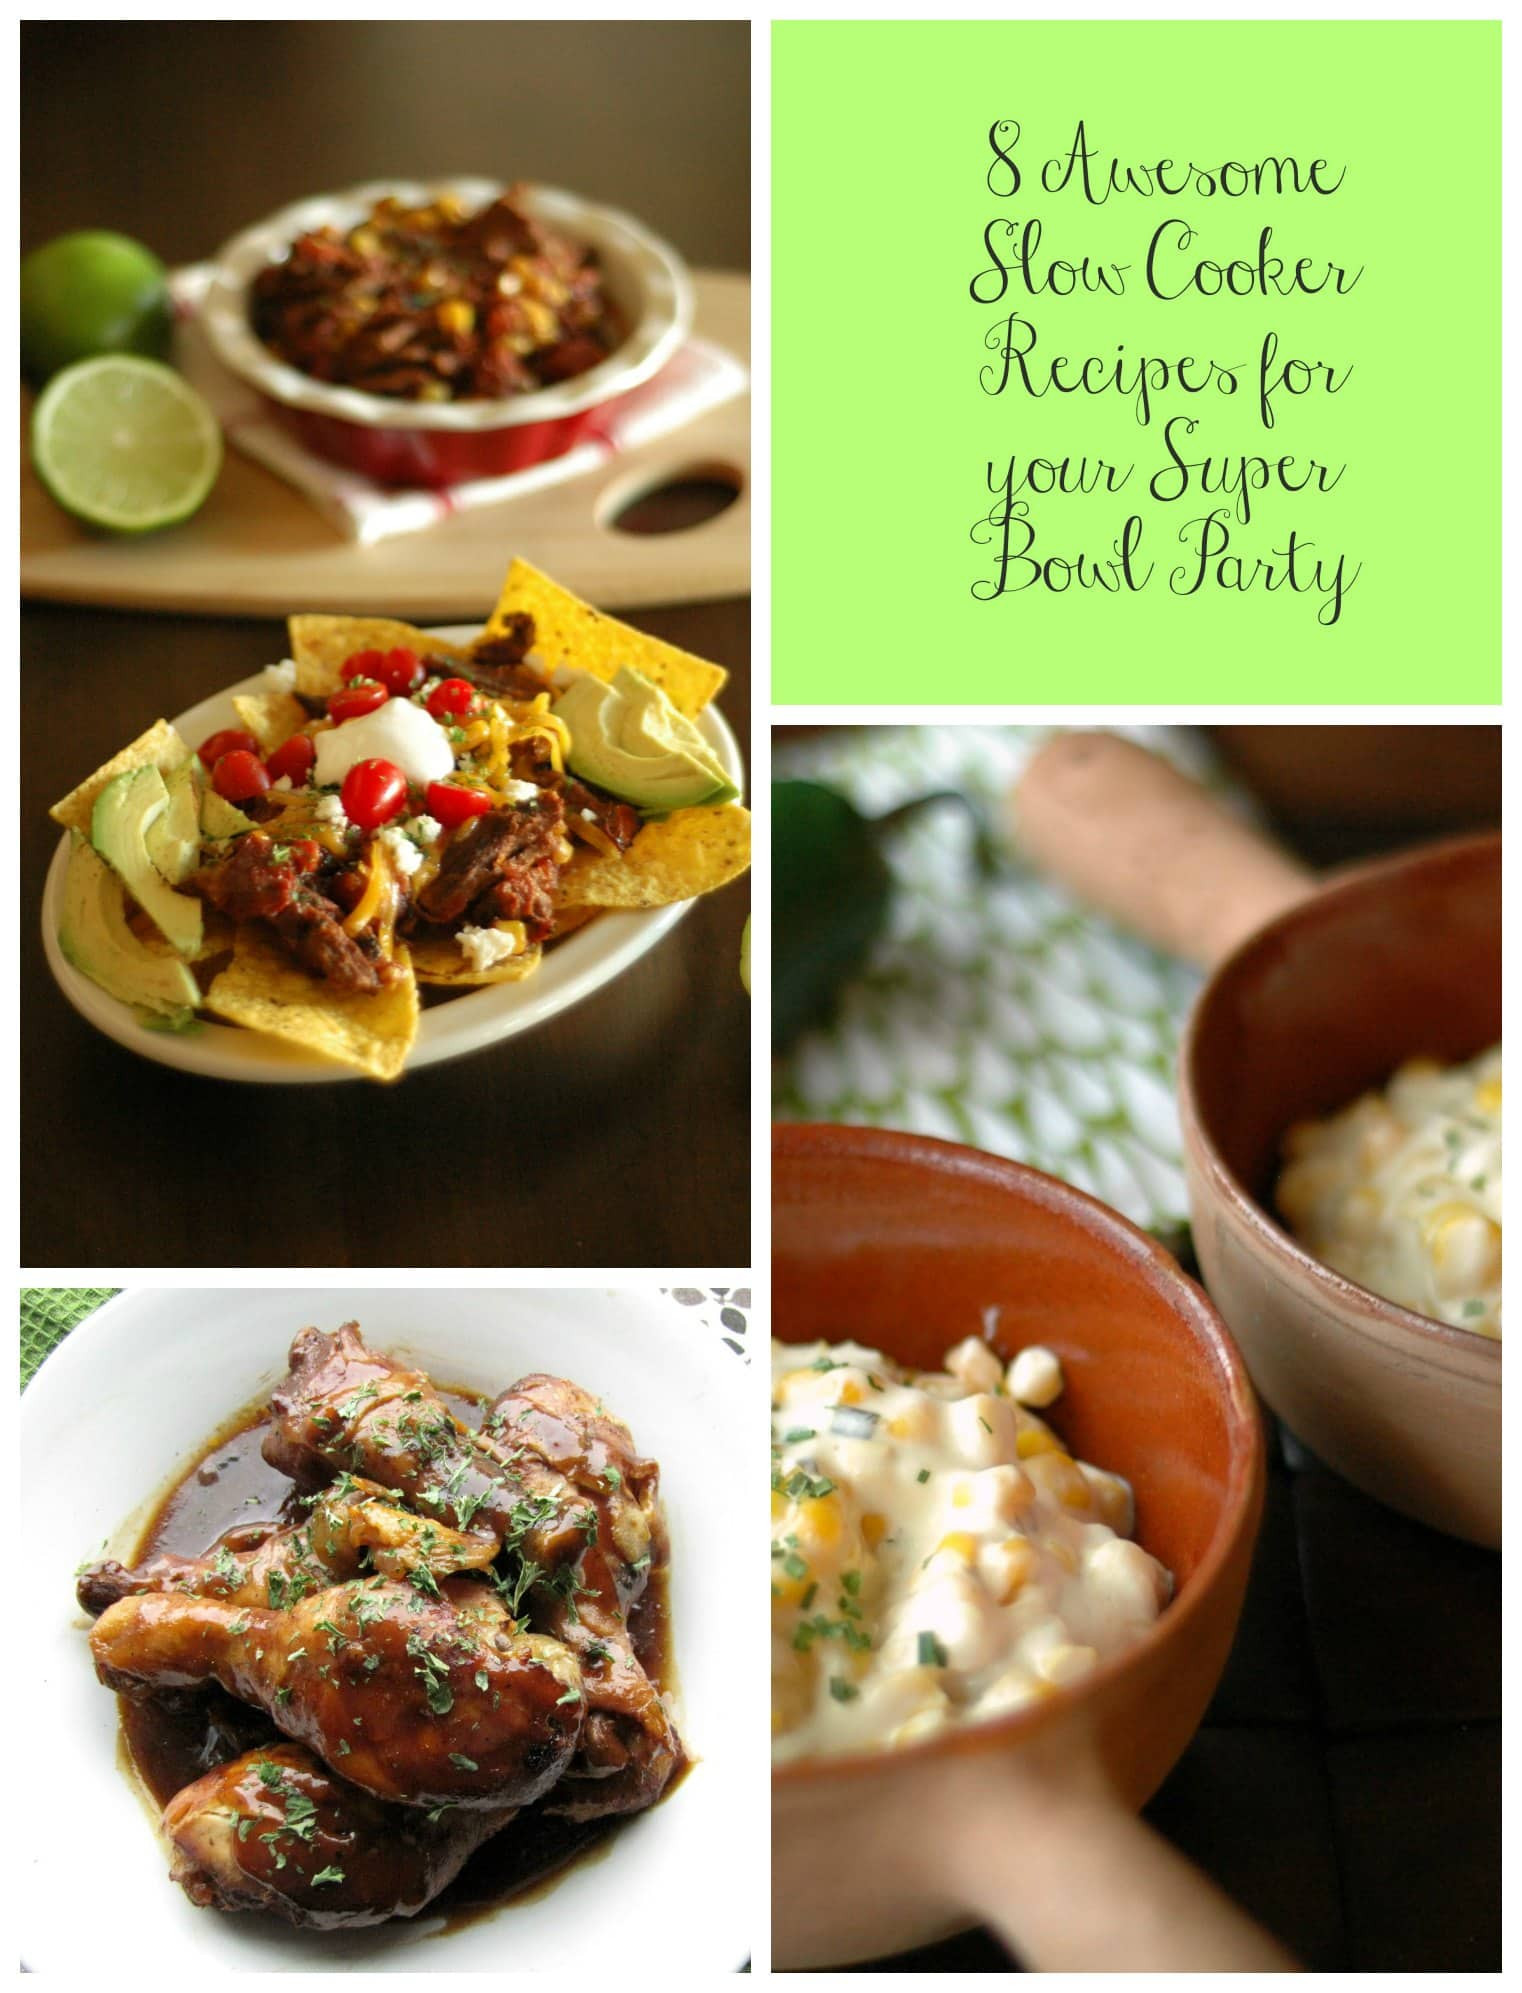 Awesome Super Bowl Recipes
 8 Awesome Slow Cooker Recipes for your Super Bowl Party